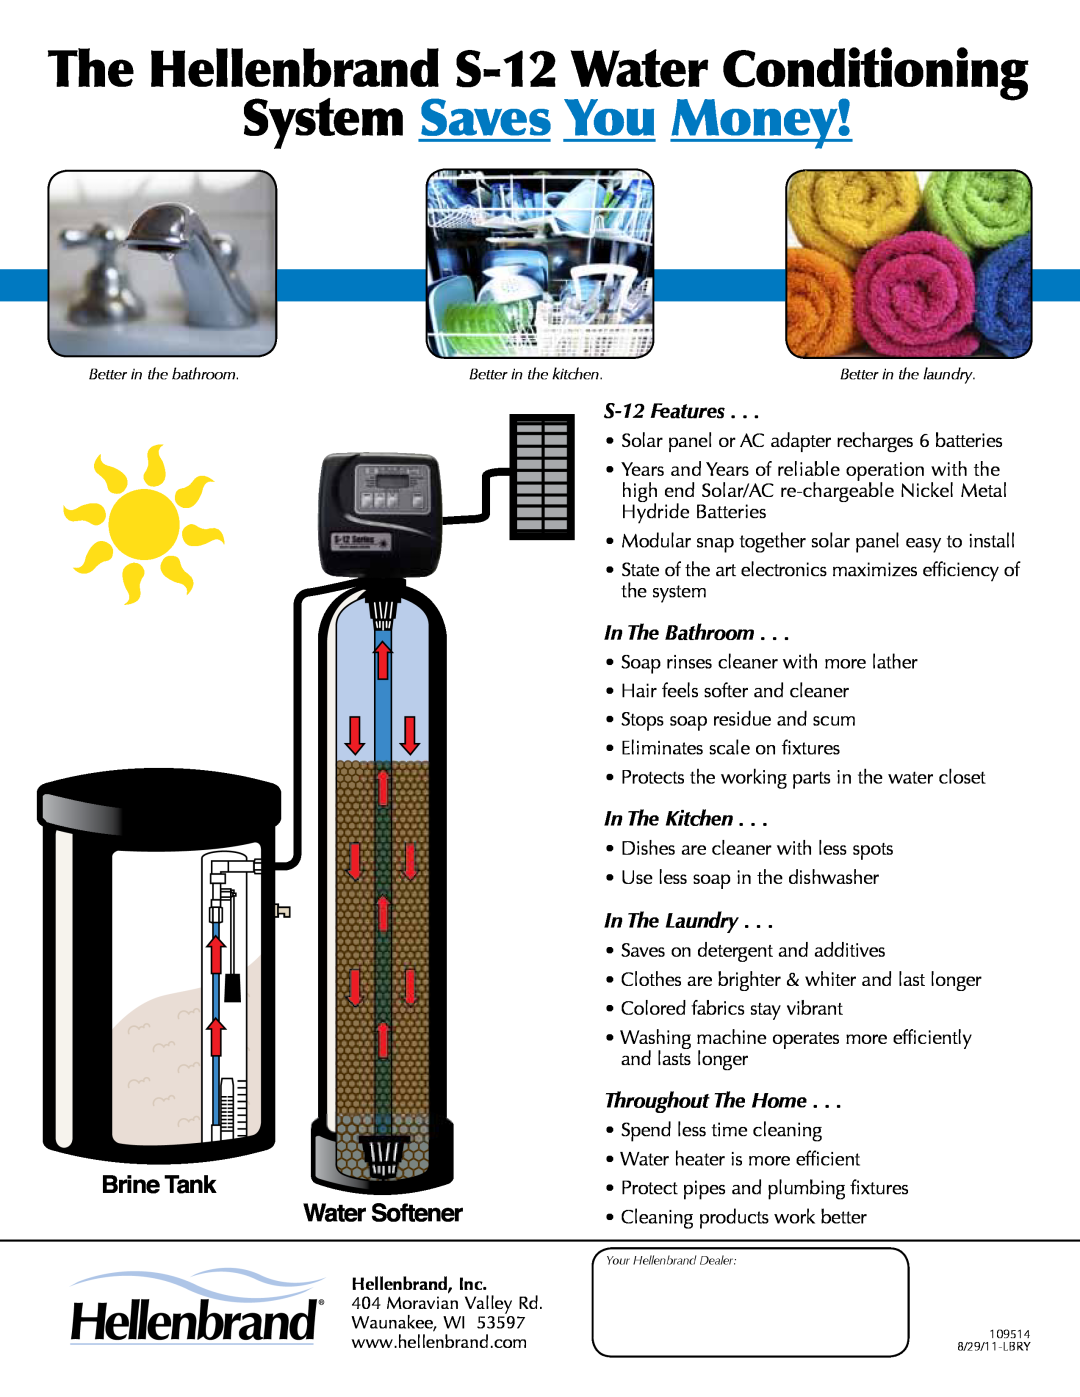 Hellenbrand S-12 SERIES manual The Hellenbrand S-12Water Conditioning, System Saves You Money, Brine Tank Water Softener 